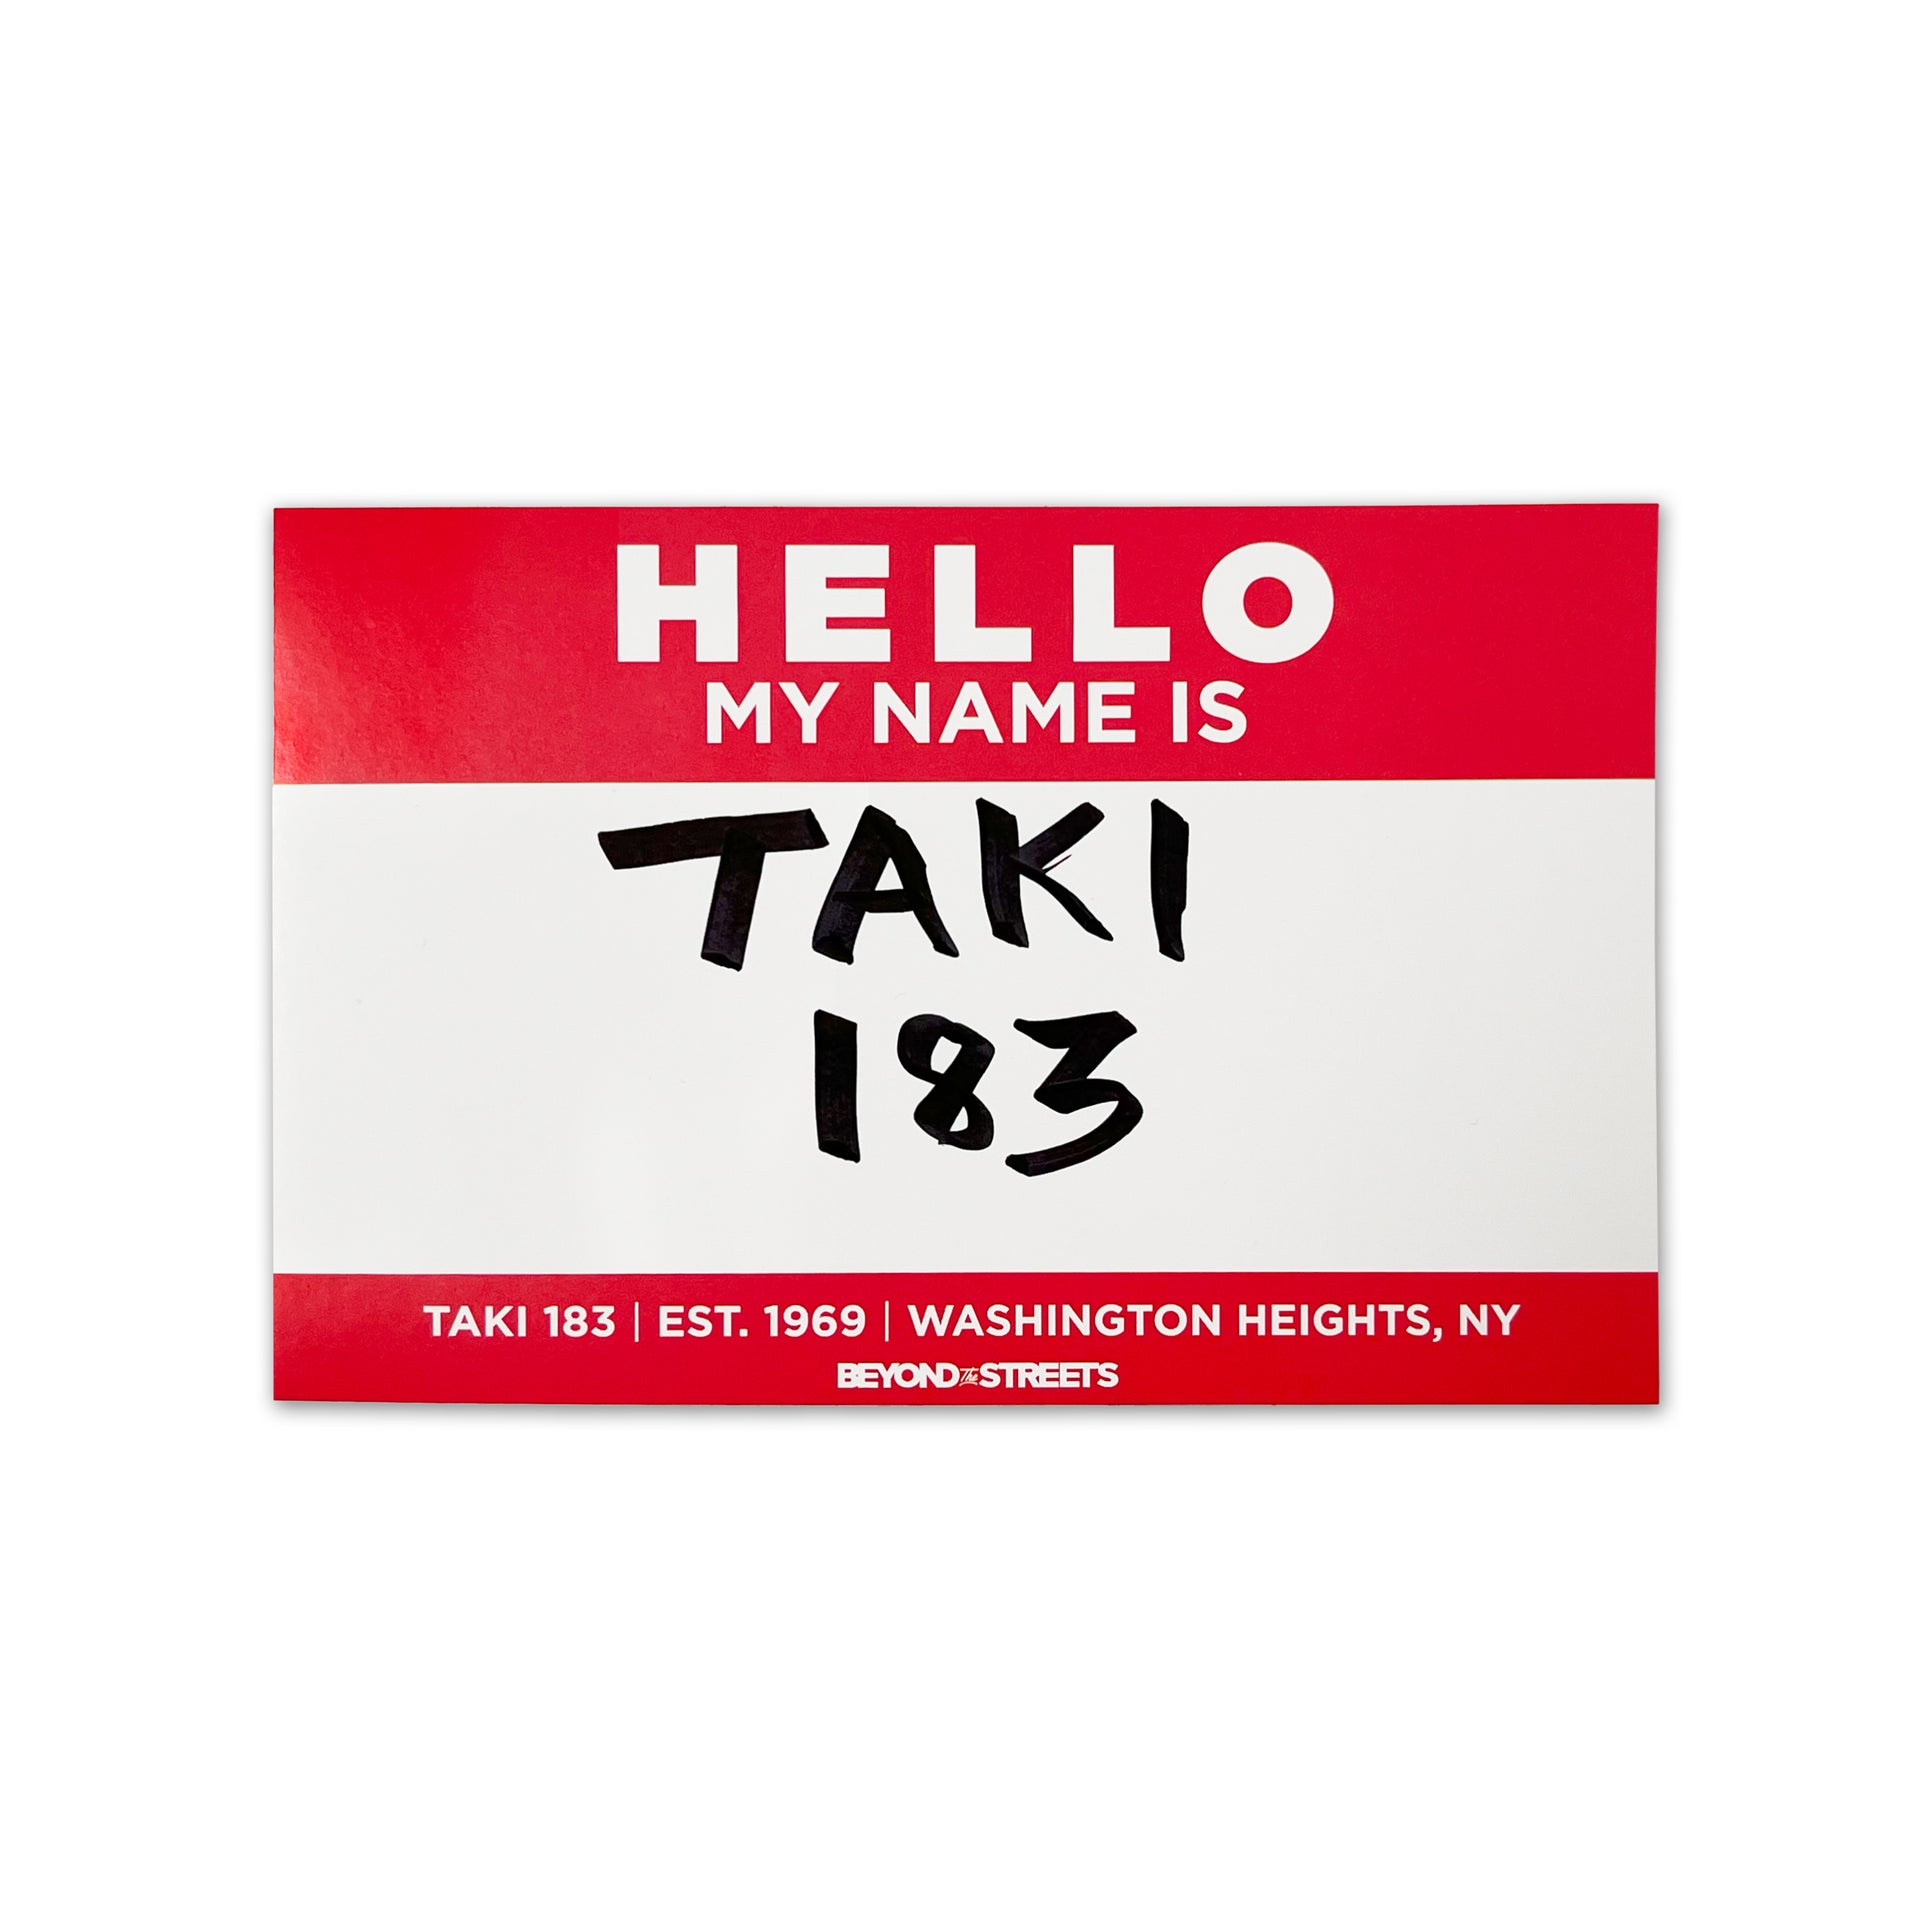 TAKI 183 "Hello My Name Is" Signed Sticker